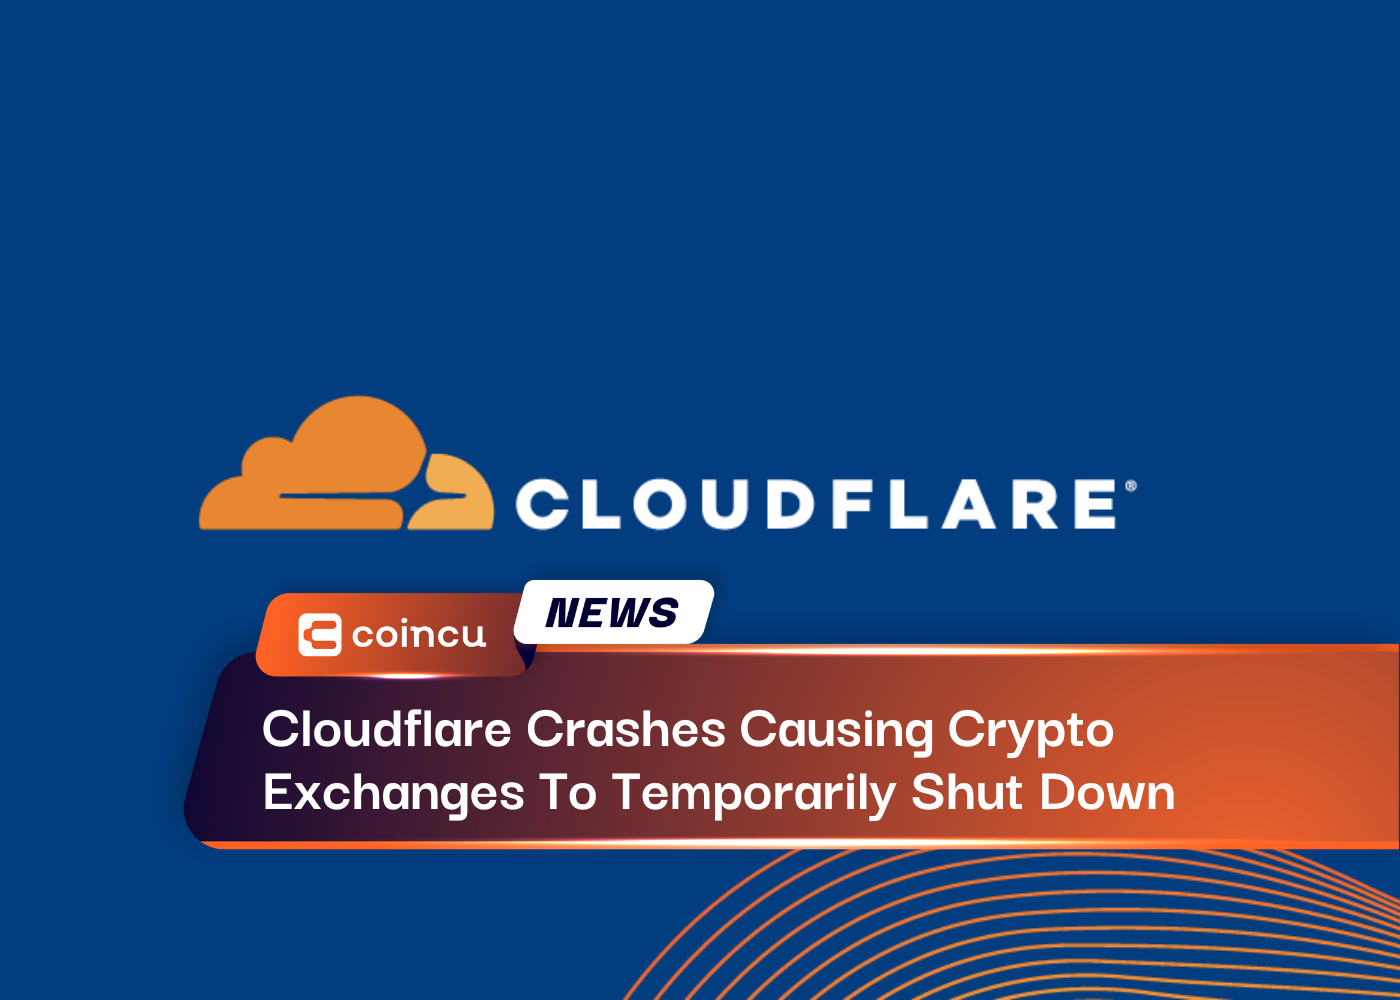 Cloudflare Crashes Causing Crypto Exchanges To Temporarily Shut Down